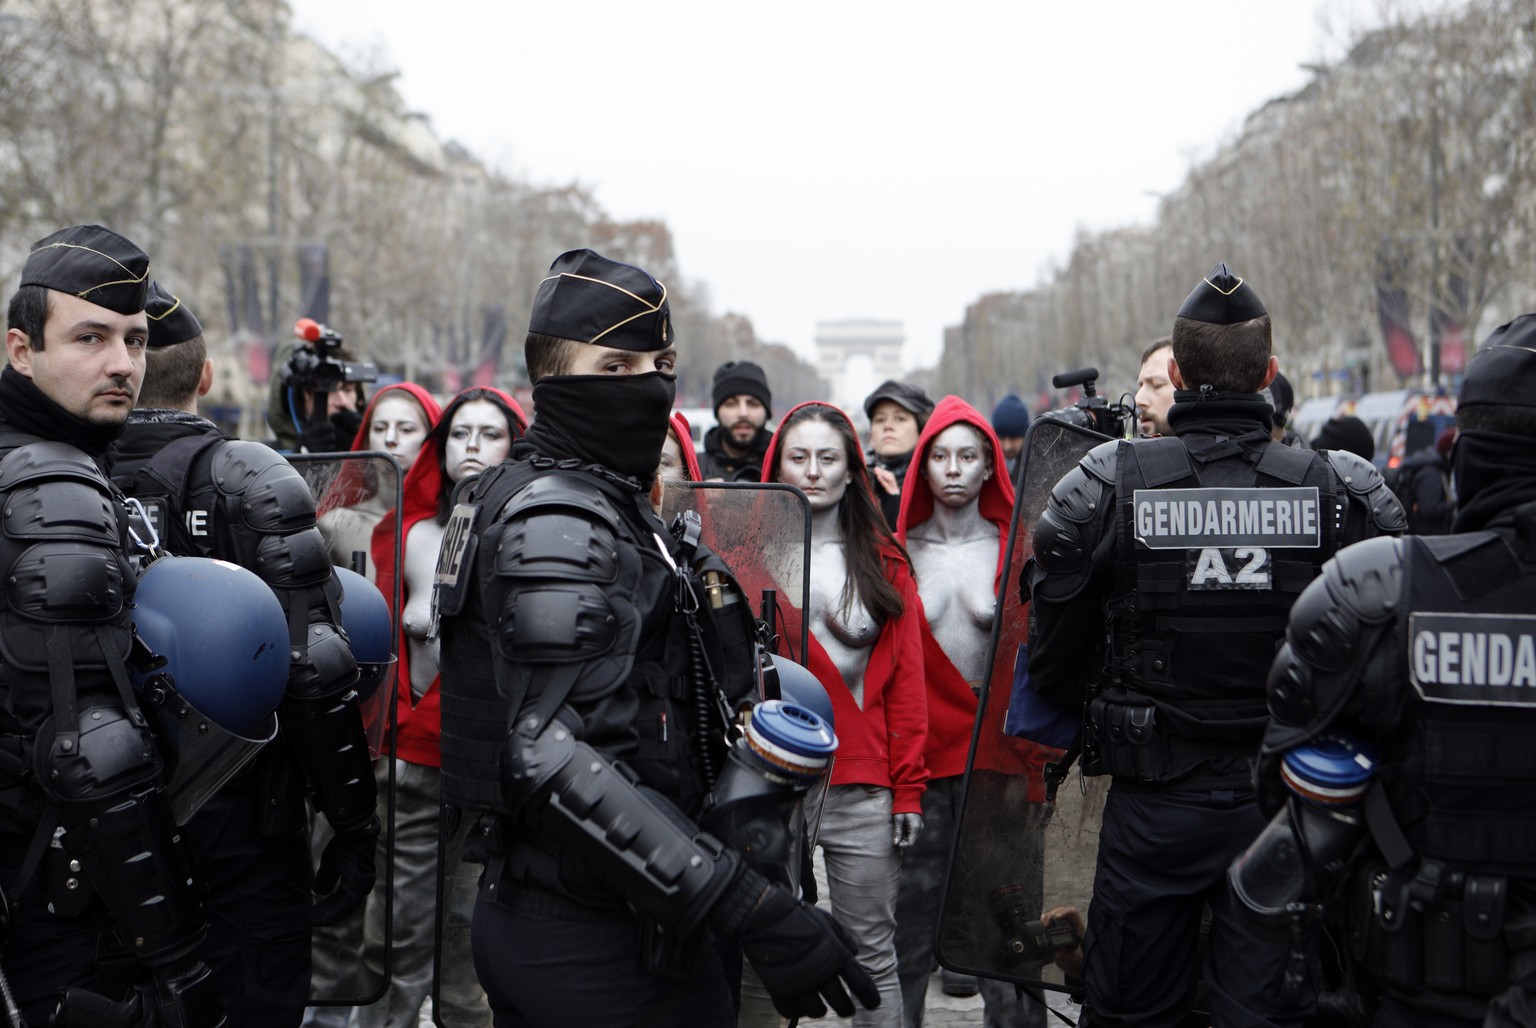 EDS NOTE : NUDITY. Activists dressed like Marianne, symbol of the French Republic, face riot police officers during a yellow vests protest Saturday, Dec. 15, 2018 in Paris. French President Emanuel Ma ...